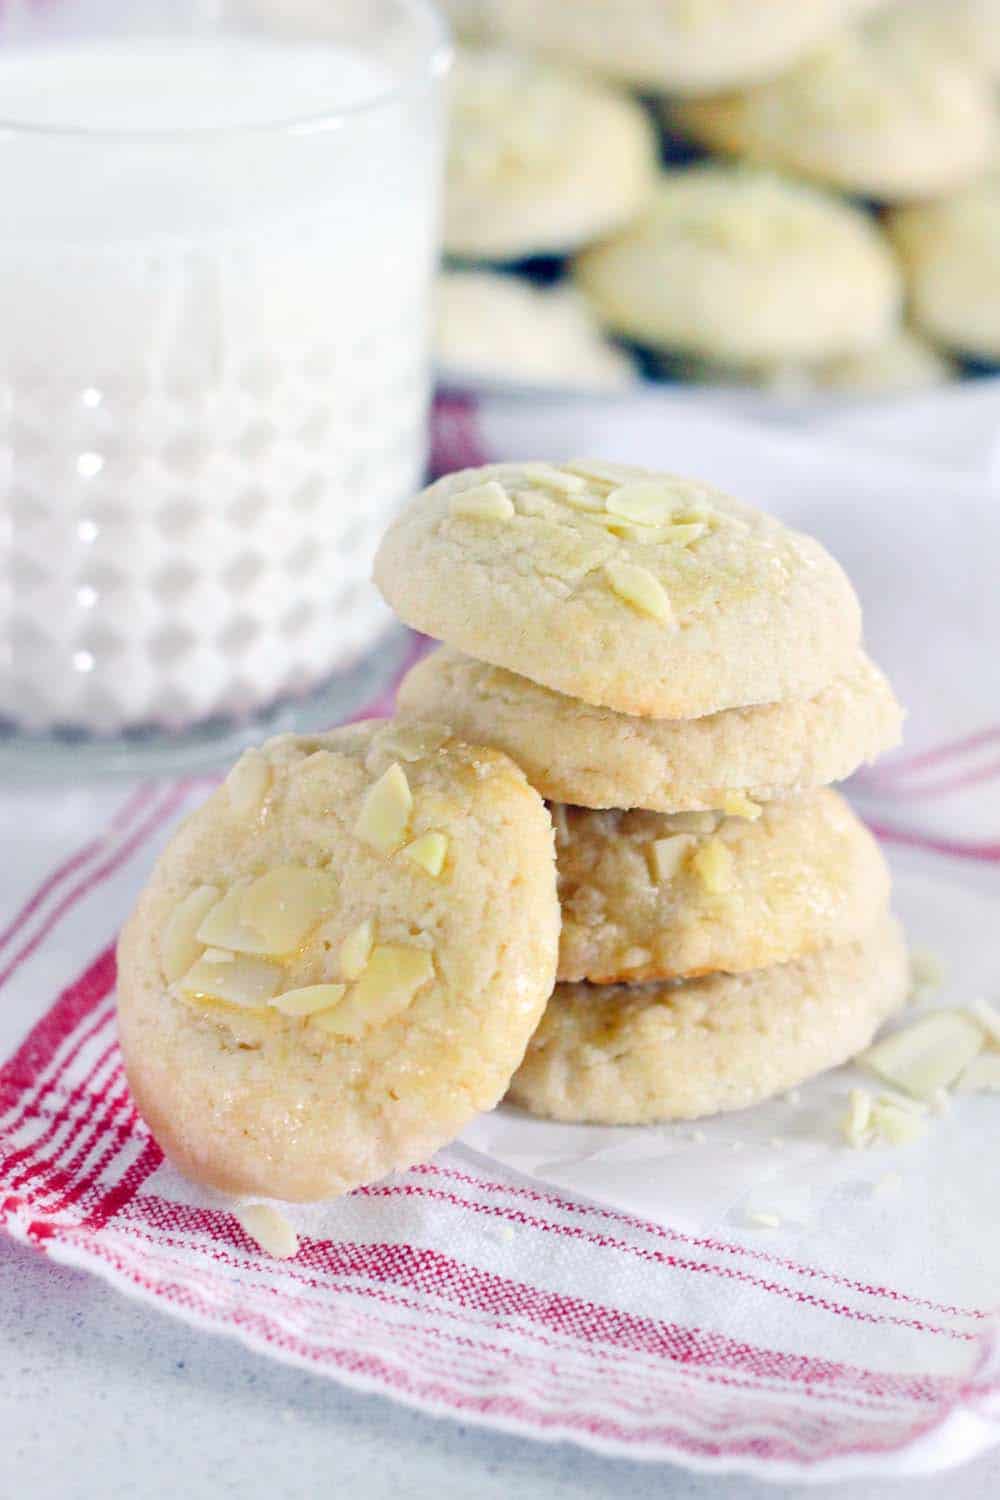 These Norwegian Butter Cookies (Serinakaker) are delicate and buttery, similar to shortbread but less crumbly, with melt-in-your-mouth almond and vanilla flavors. They are the PERFECT cookie, especially if you're looking for a new Christmas cookie recipe! | www.bowlofdelicious.com